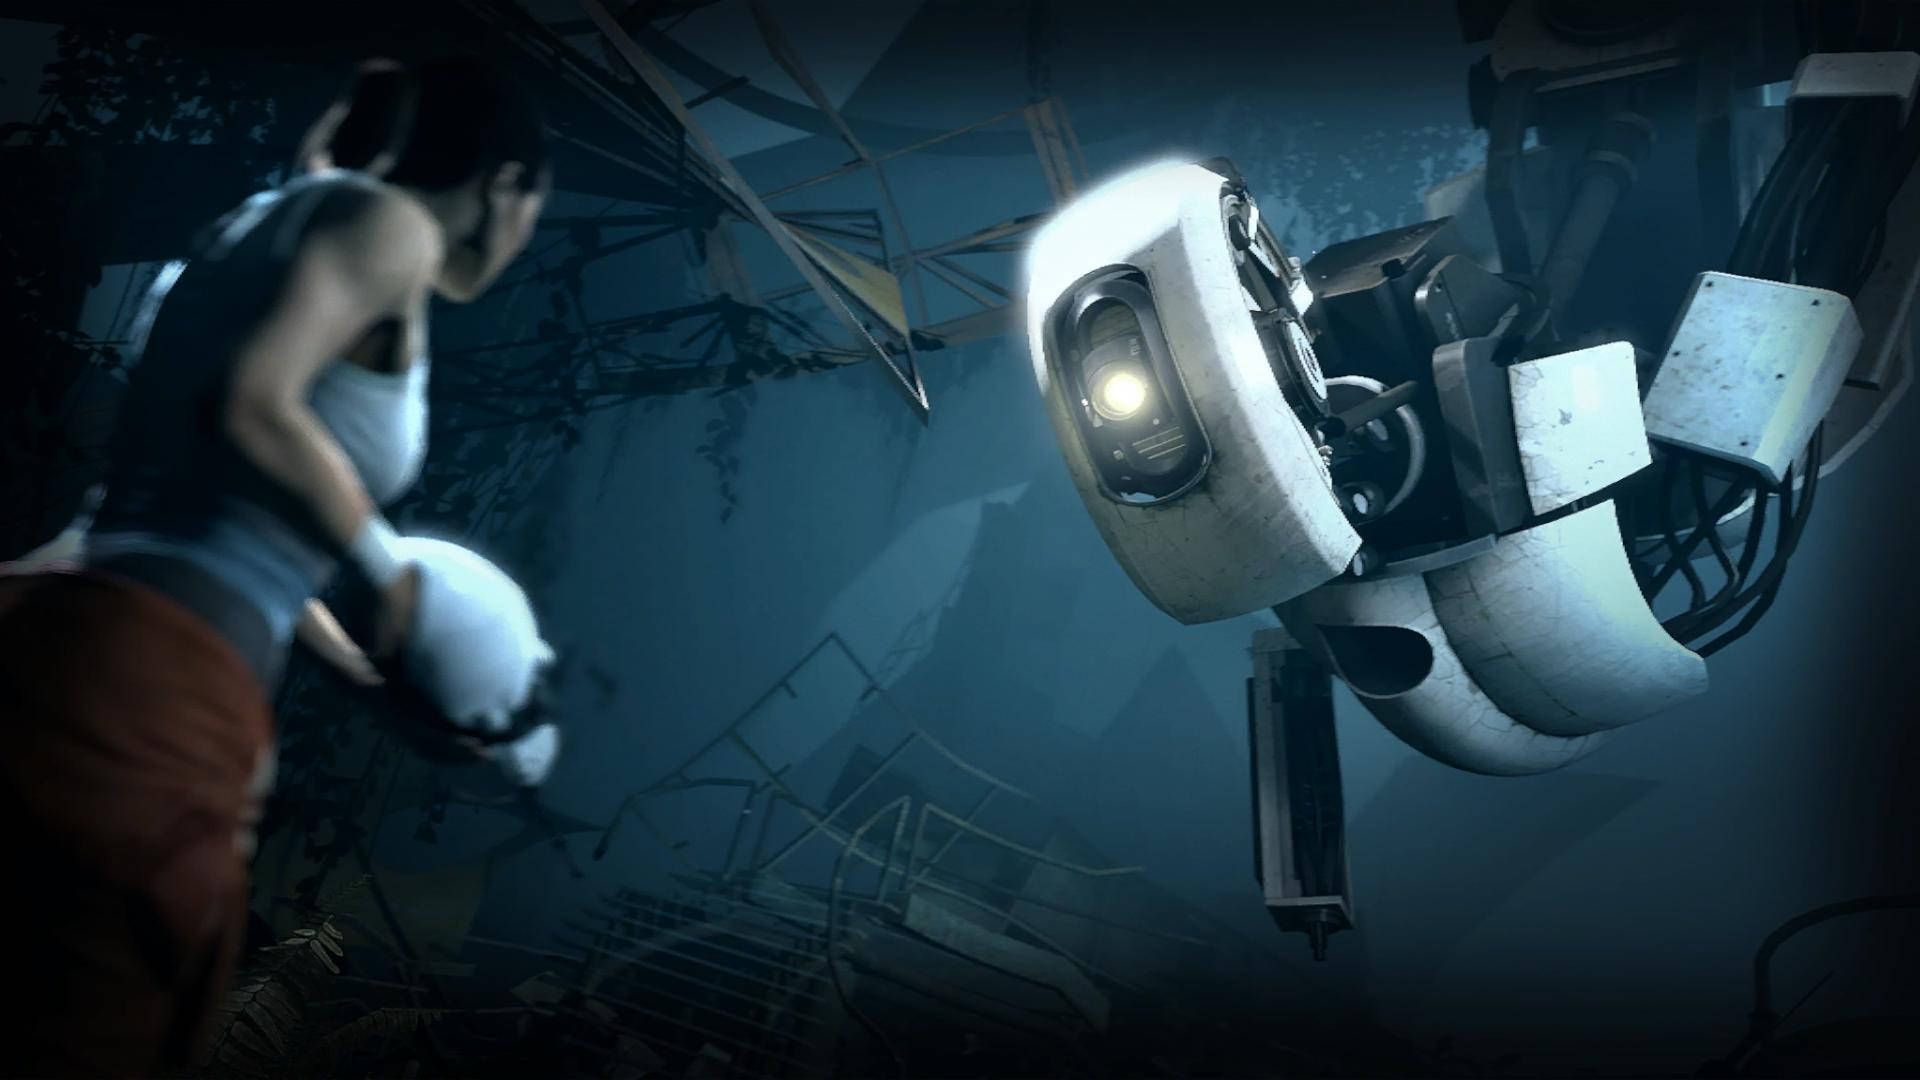 Get lost in the world of Aperture Science with Portal 2 Wallpaper